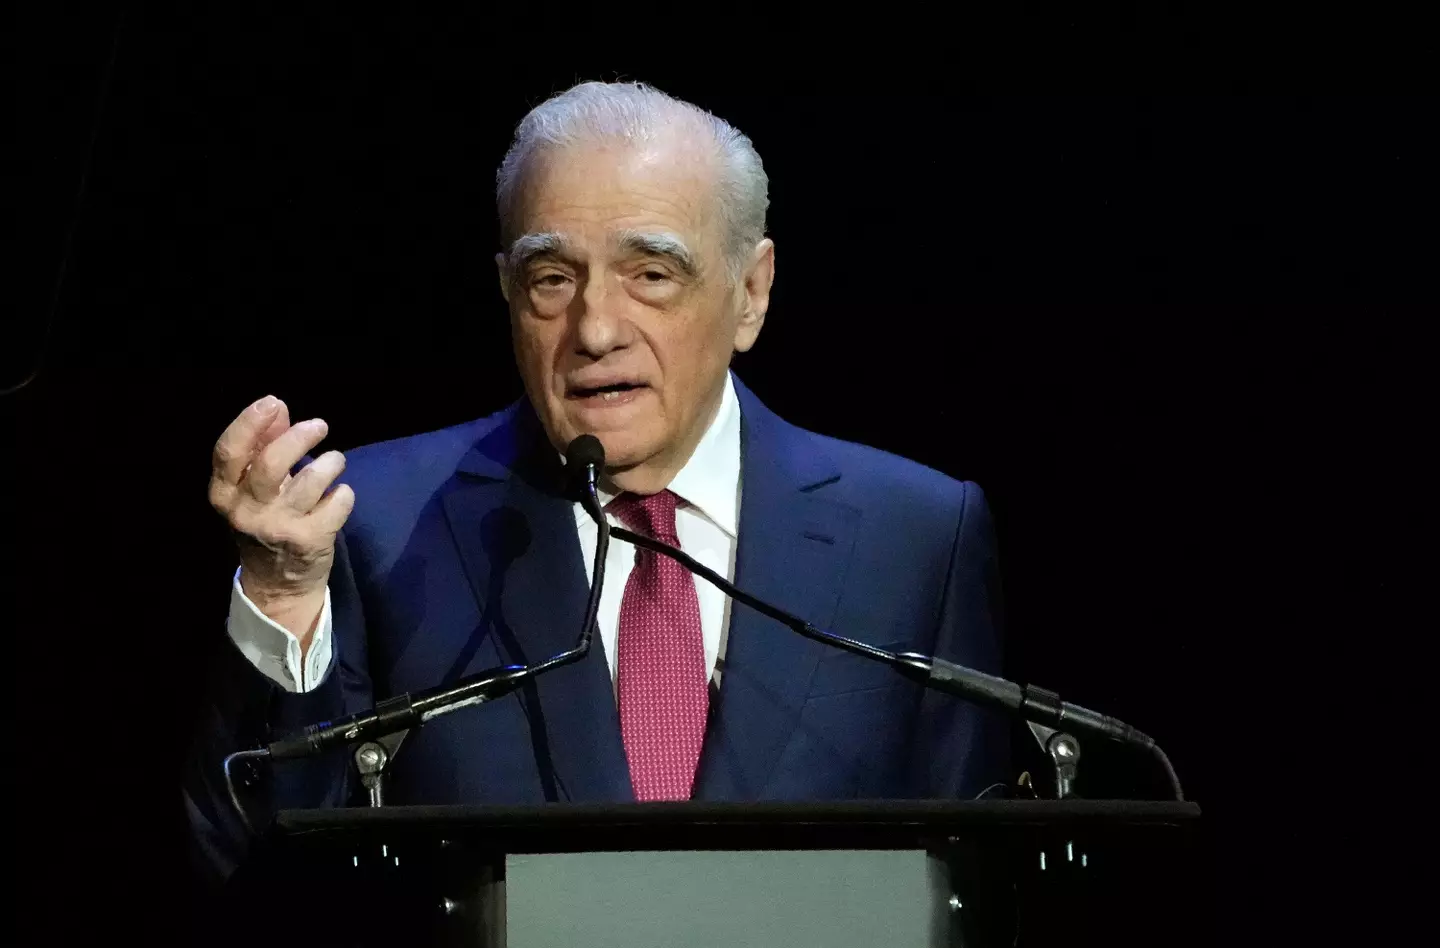 Martin Scorsese has said there's not enough time to tell all the stories he wants.